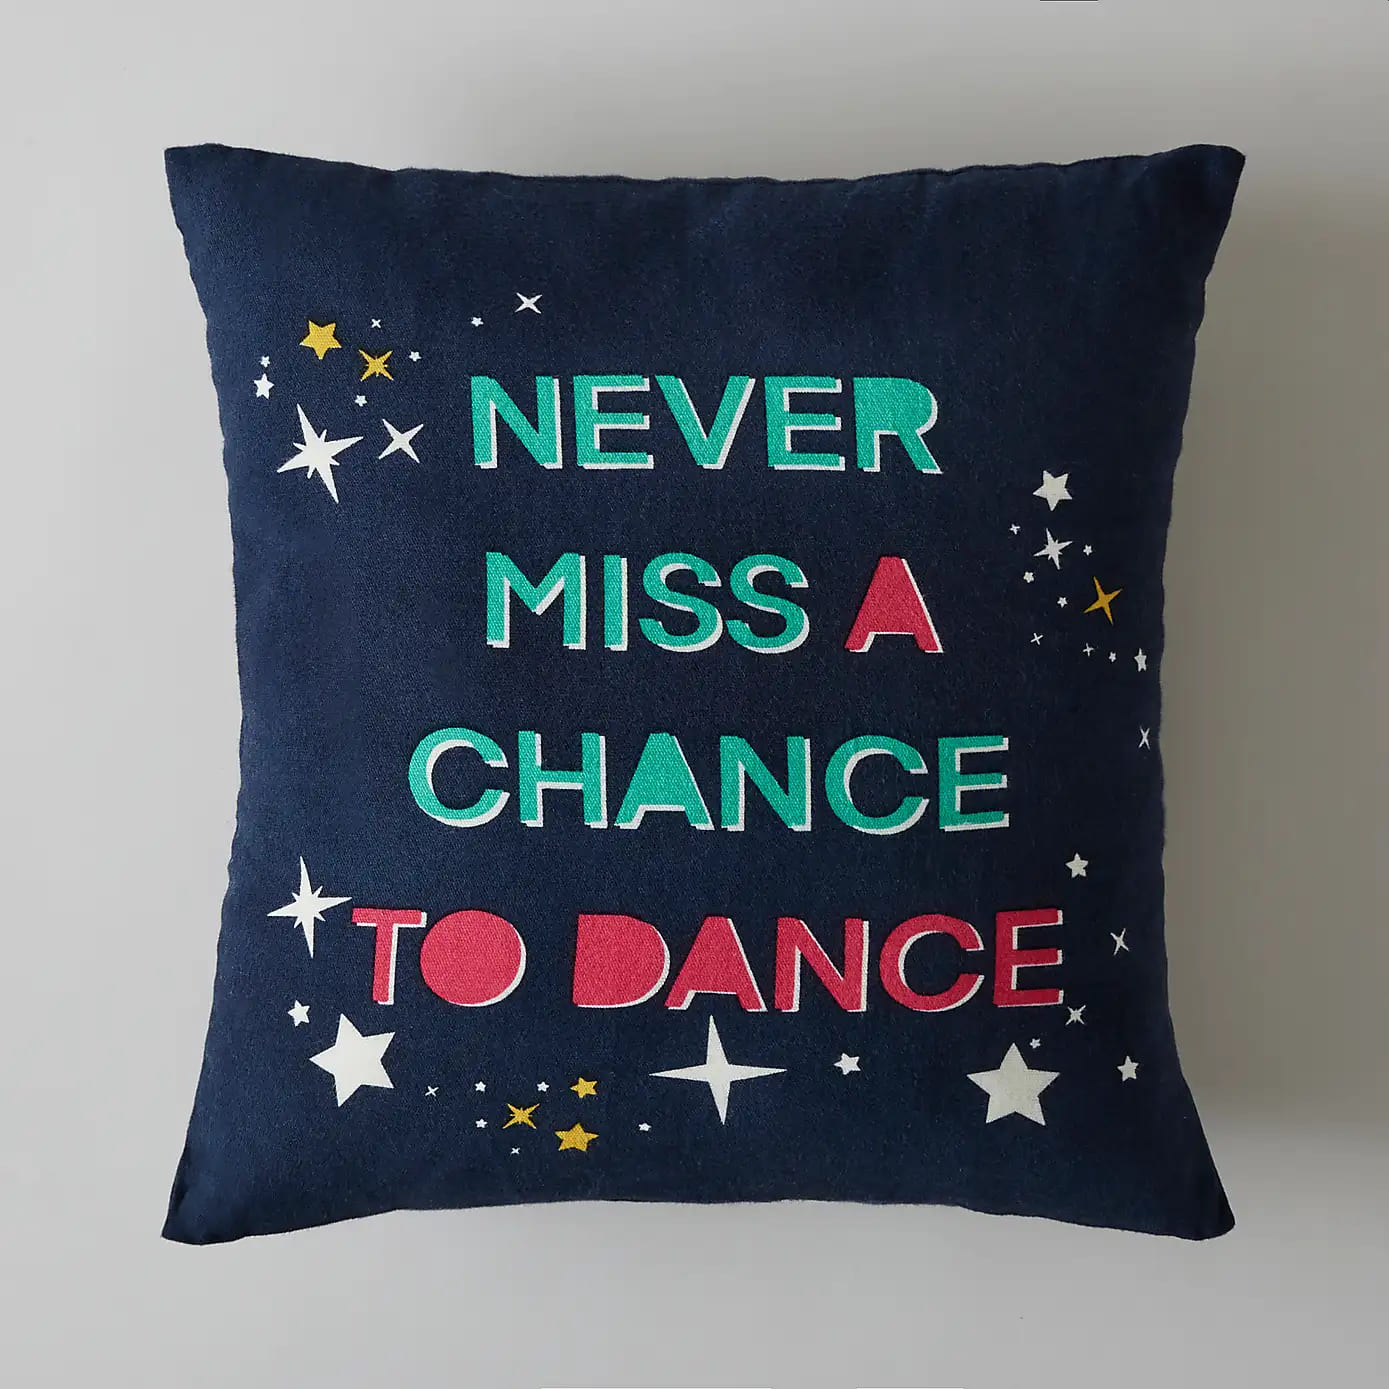 Never-Miss-A-Chance-To-Dance-Printed-Cushion